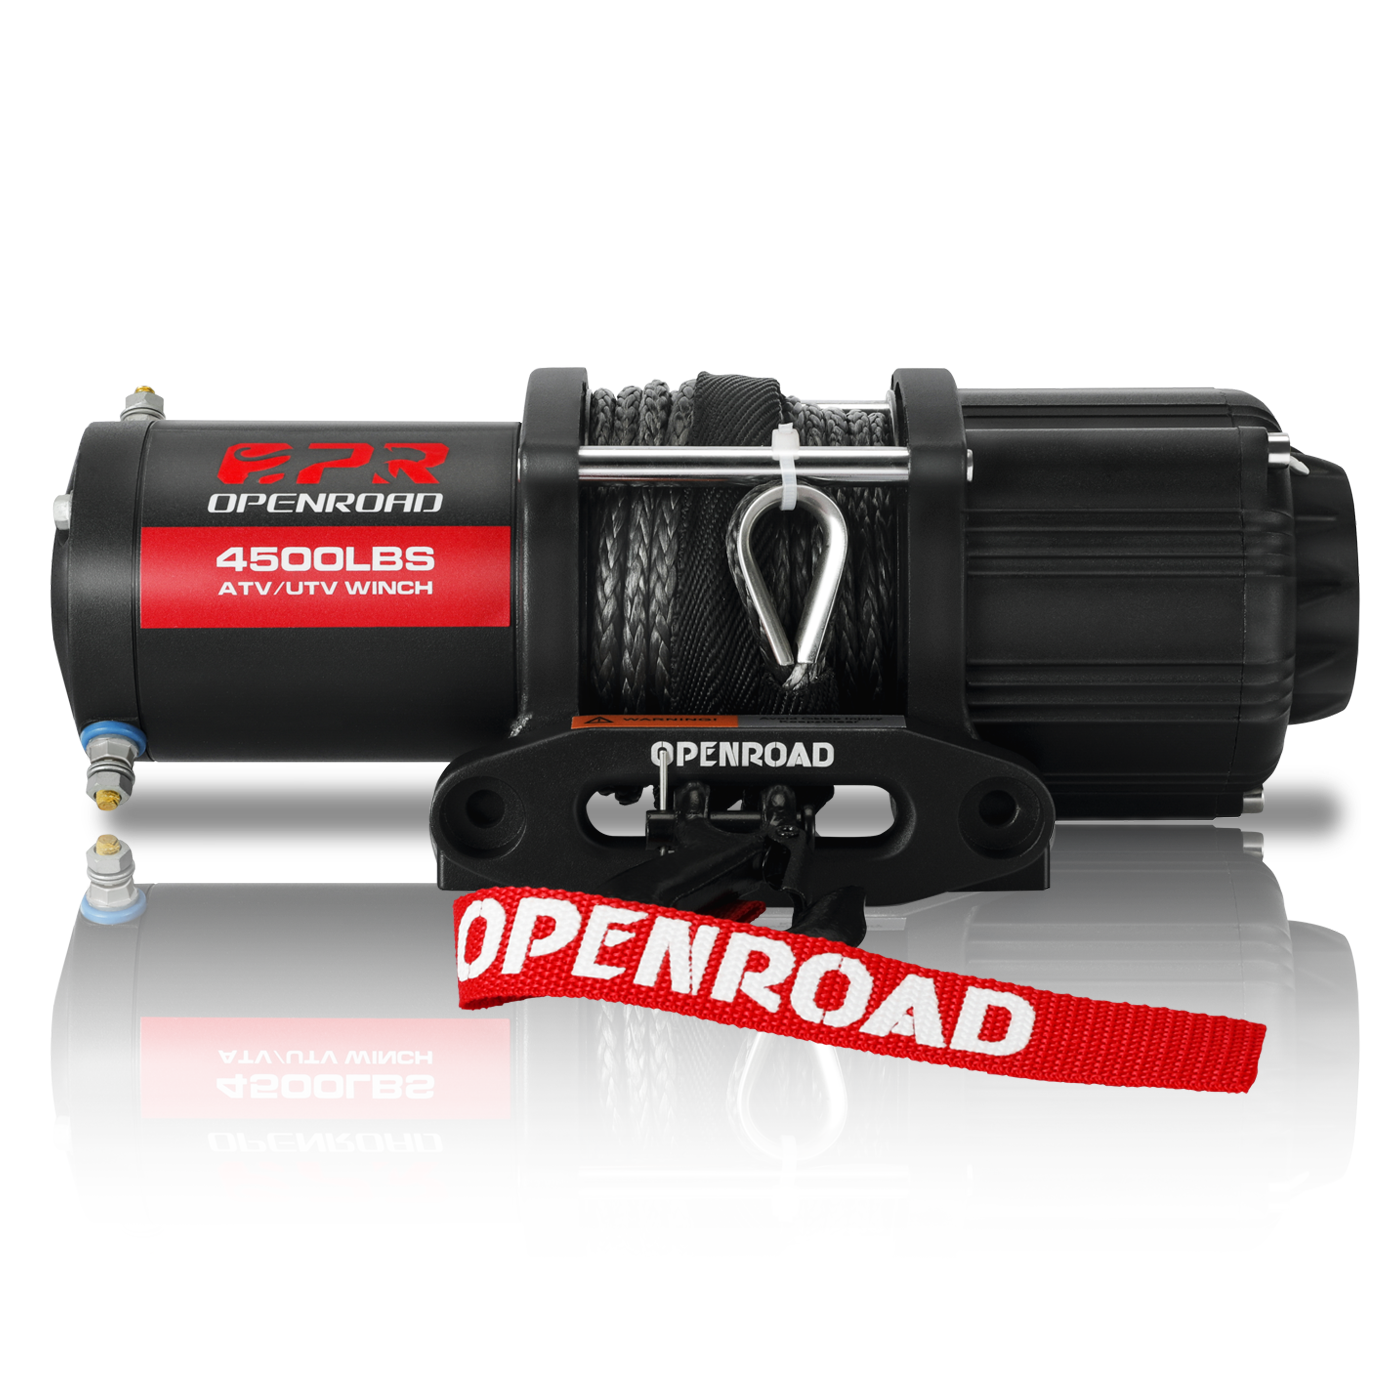 OPENROAD 4500lbs ATV/UTV Winch With Synthetic Rope and 2 Wireless Remotes winch OPENROAD   